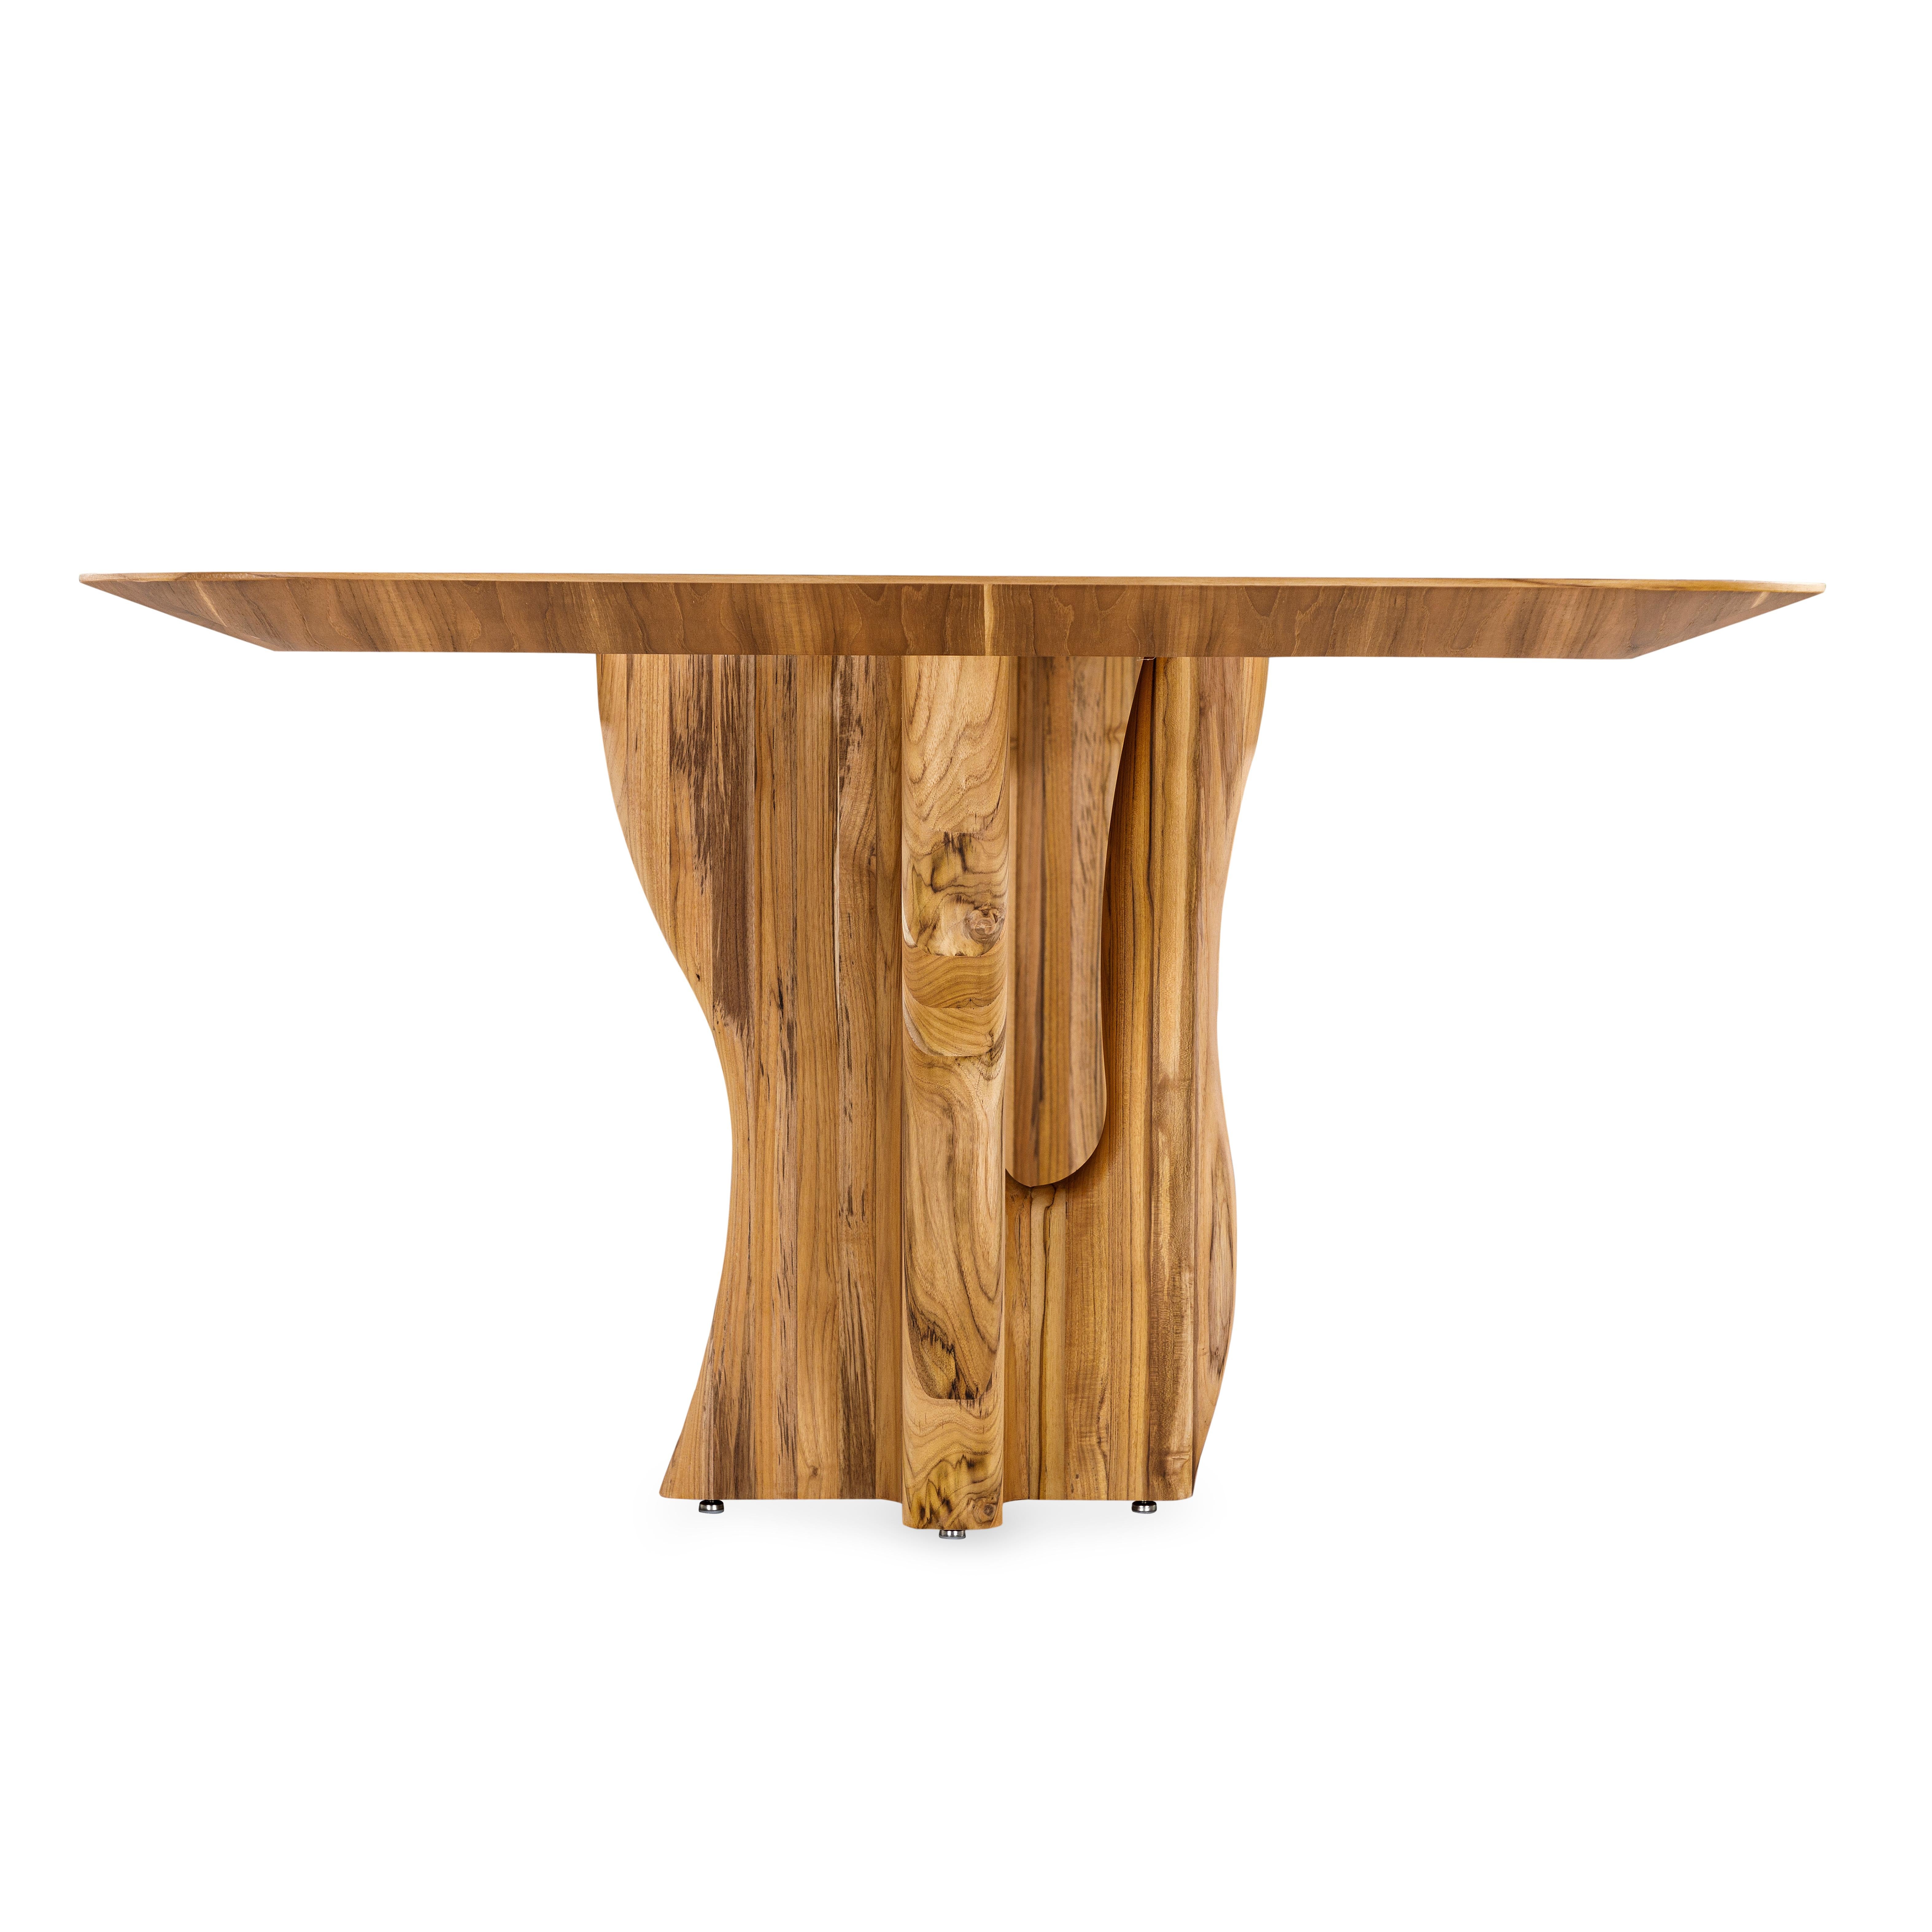 Contemporary Suma Dining Table with Teak Veneered Top and Organic Solid Wood Legs 110'' For Sale